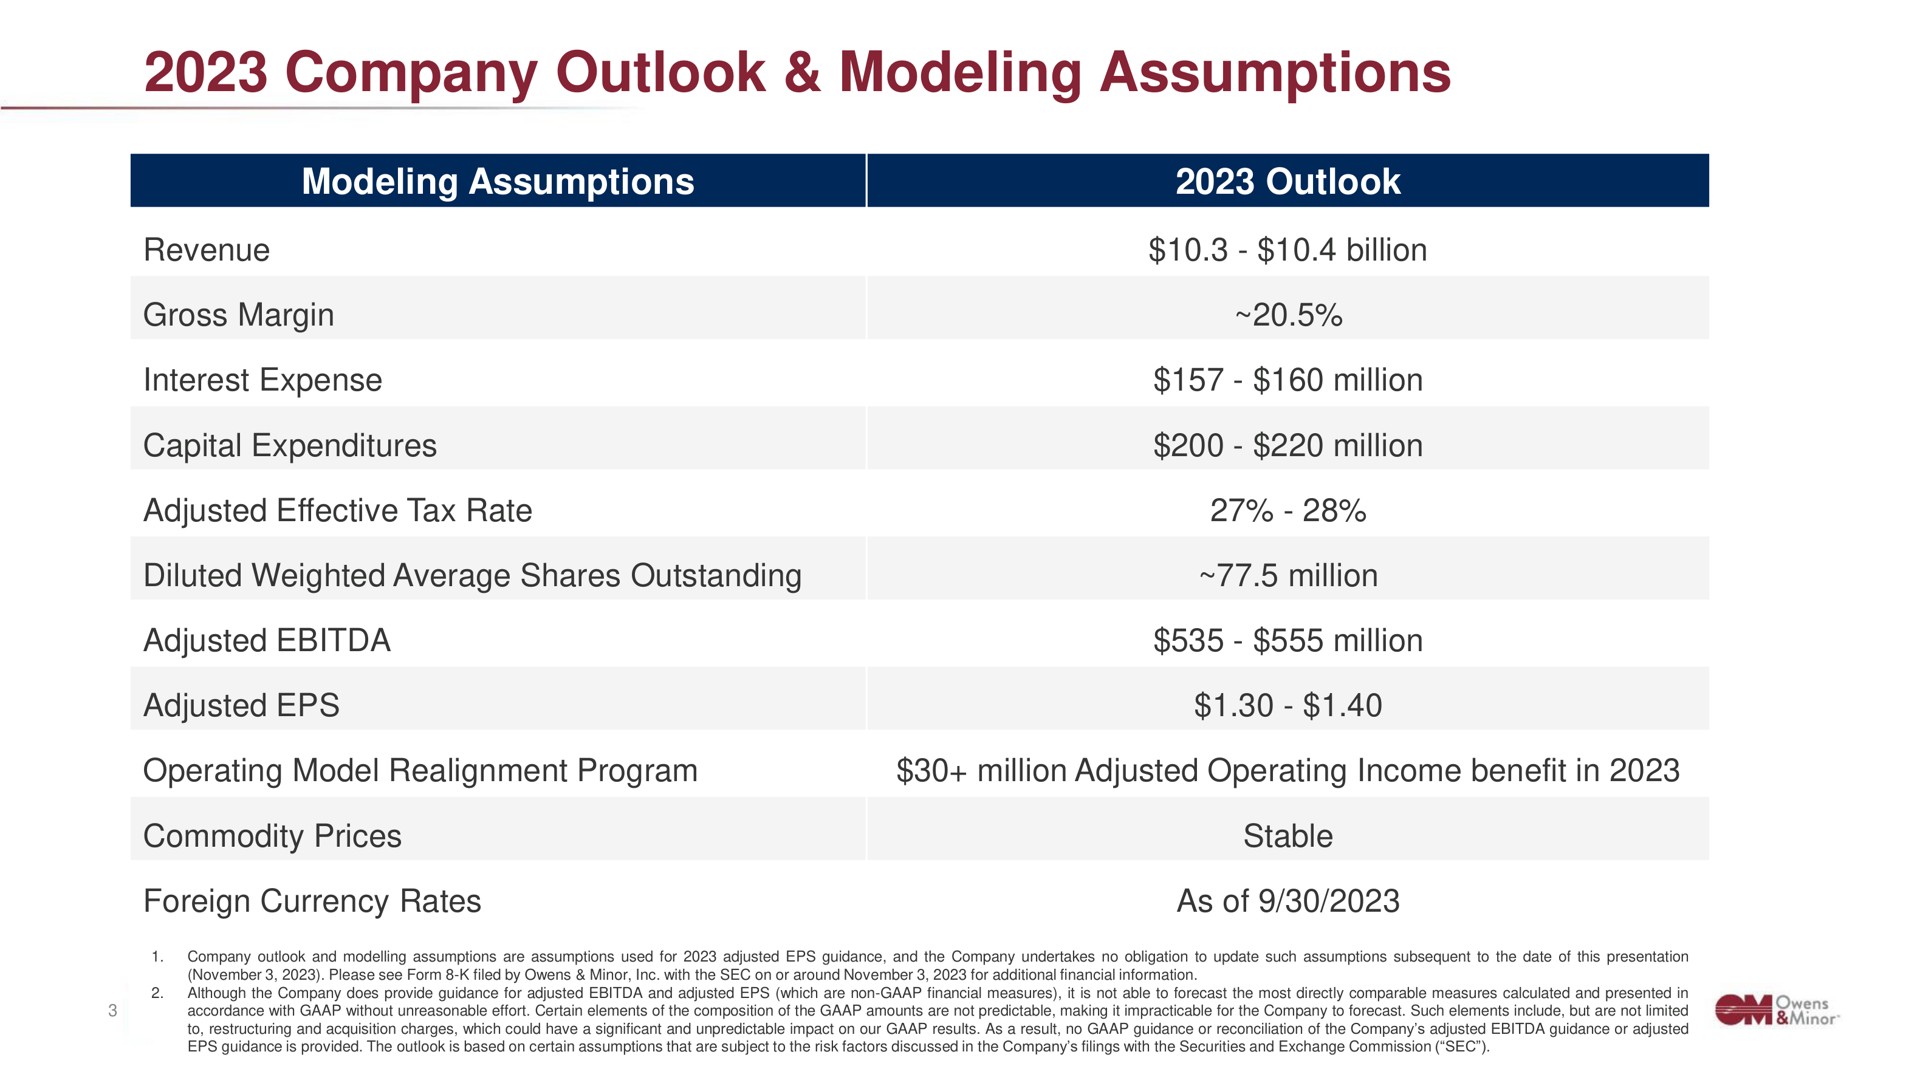 company outlook modeling assumptions | Owens&Minor